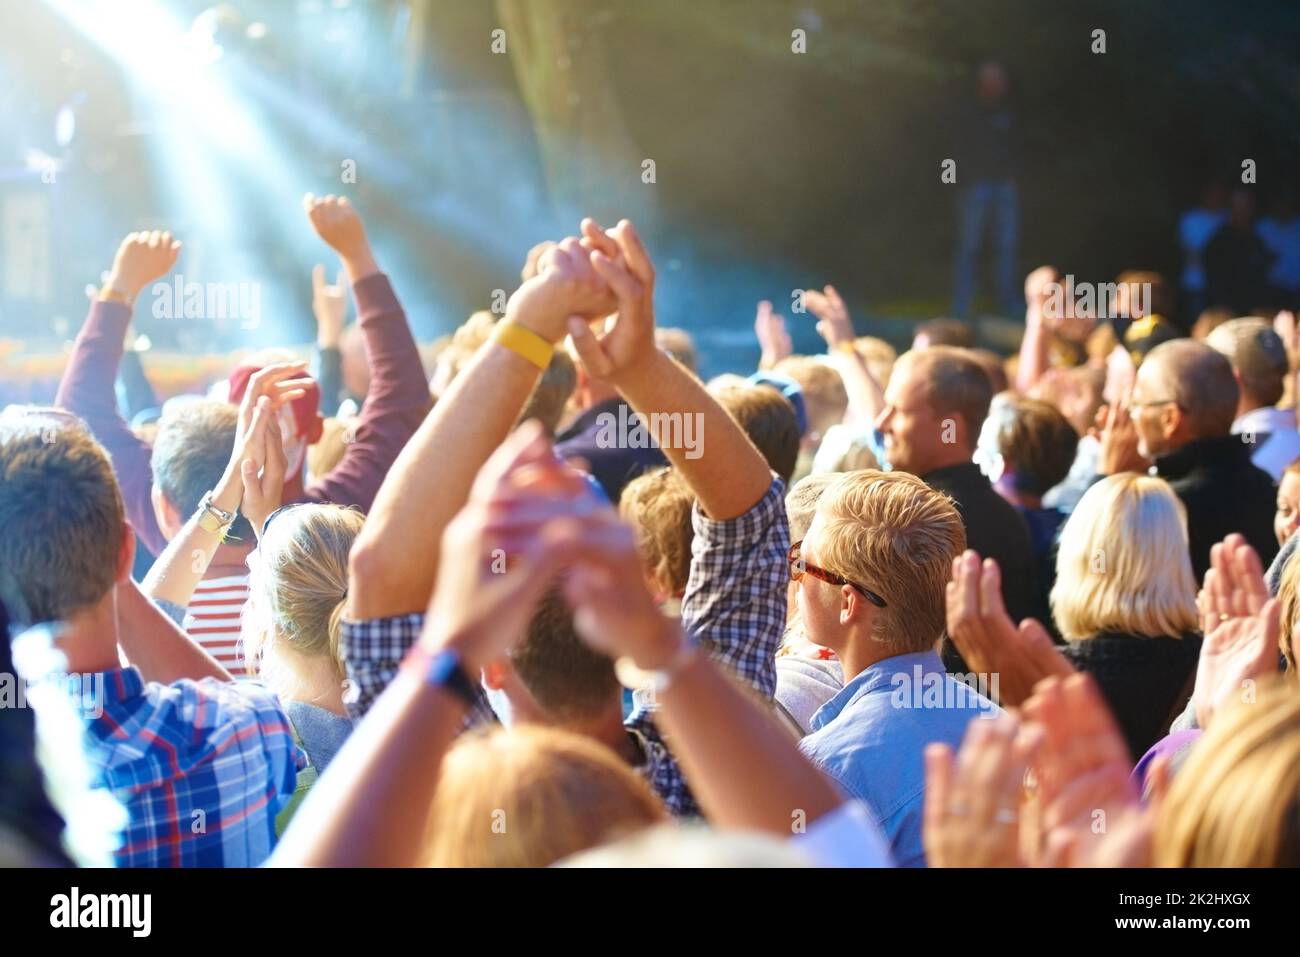 Enjoying the music festival. Cropped shot of a large crowd at a music concert. Stock Photo